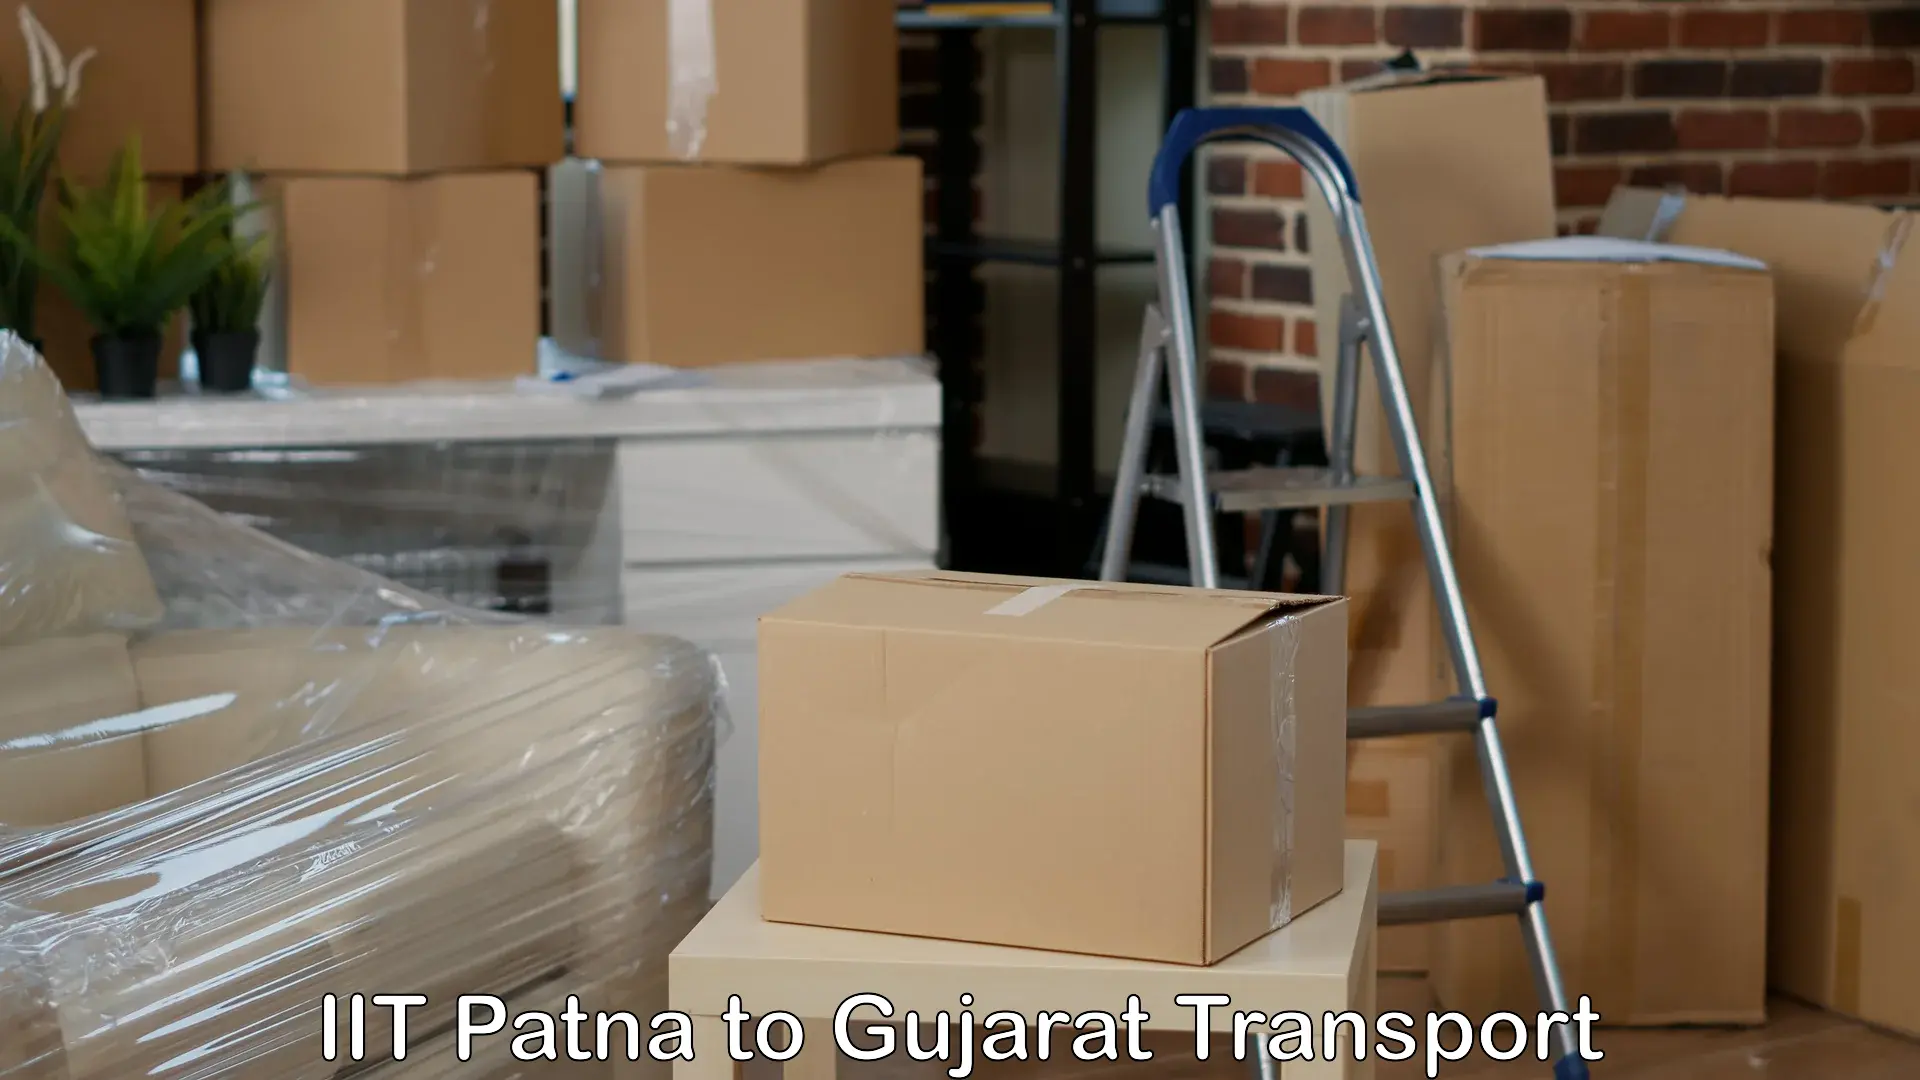 Daily parcel service transport IIT Patna to Palanpur